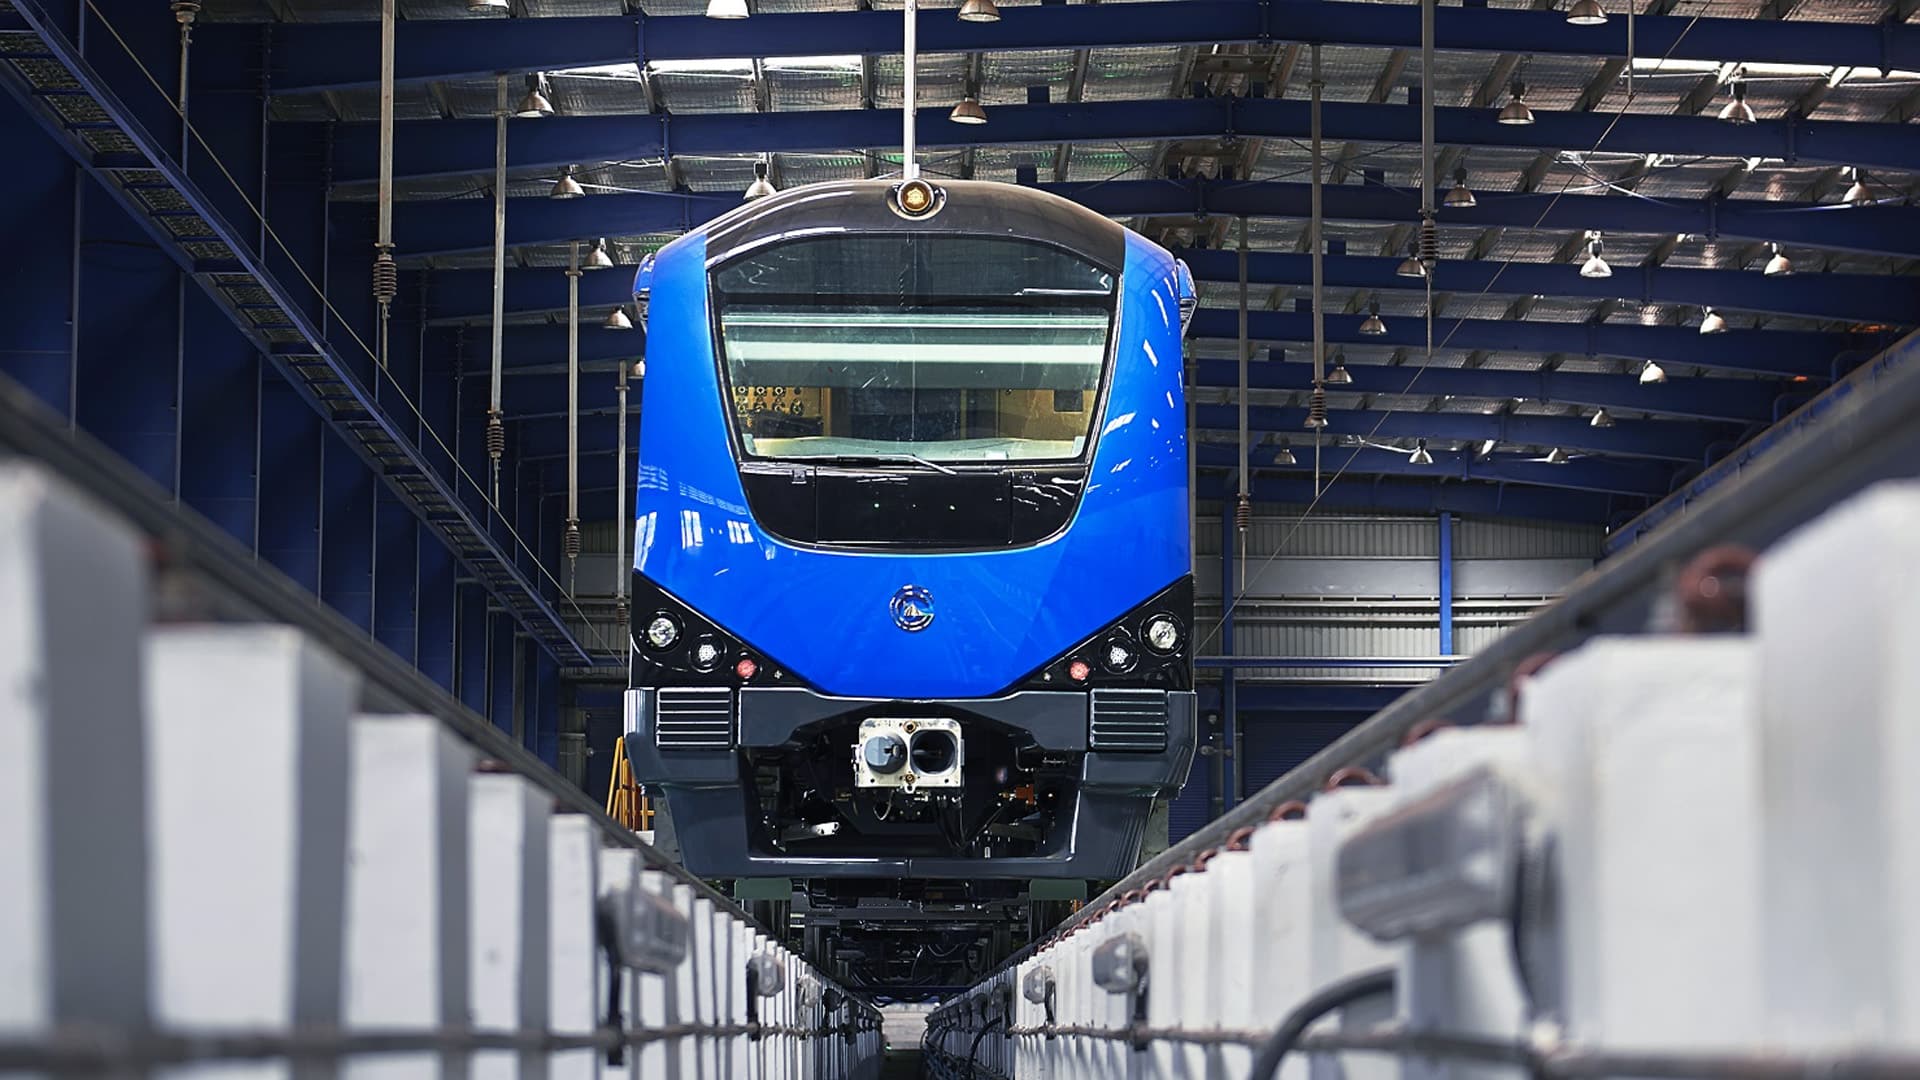 Alstom wins 98 million contract to design and manufacture 78 metro coaches for Chennai Metro Phase-II